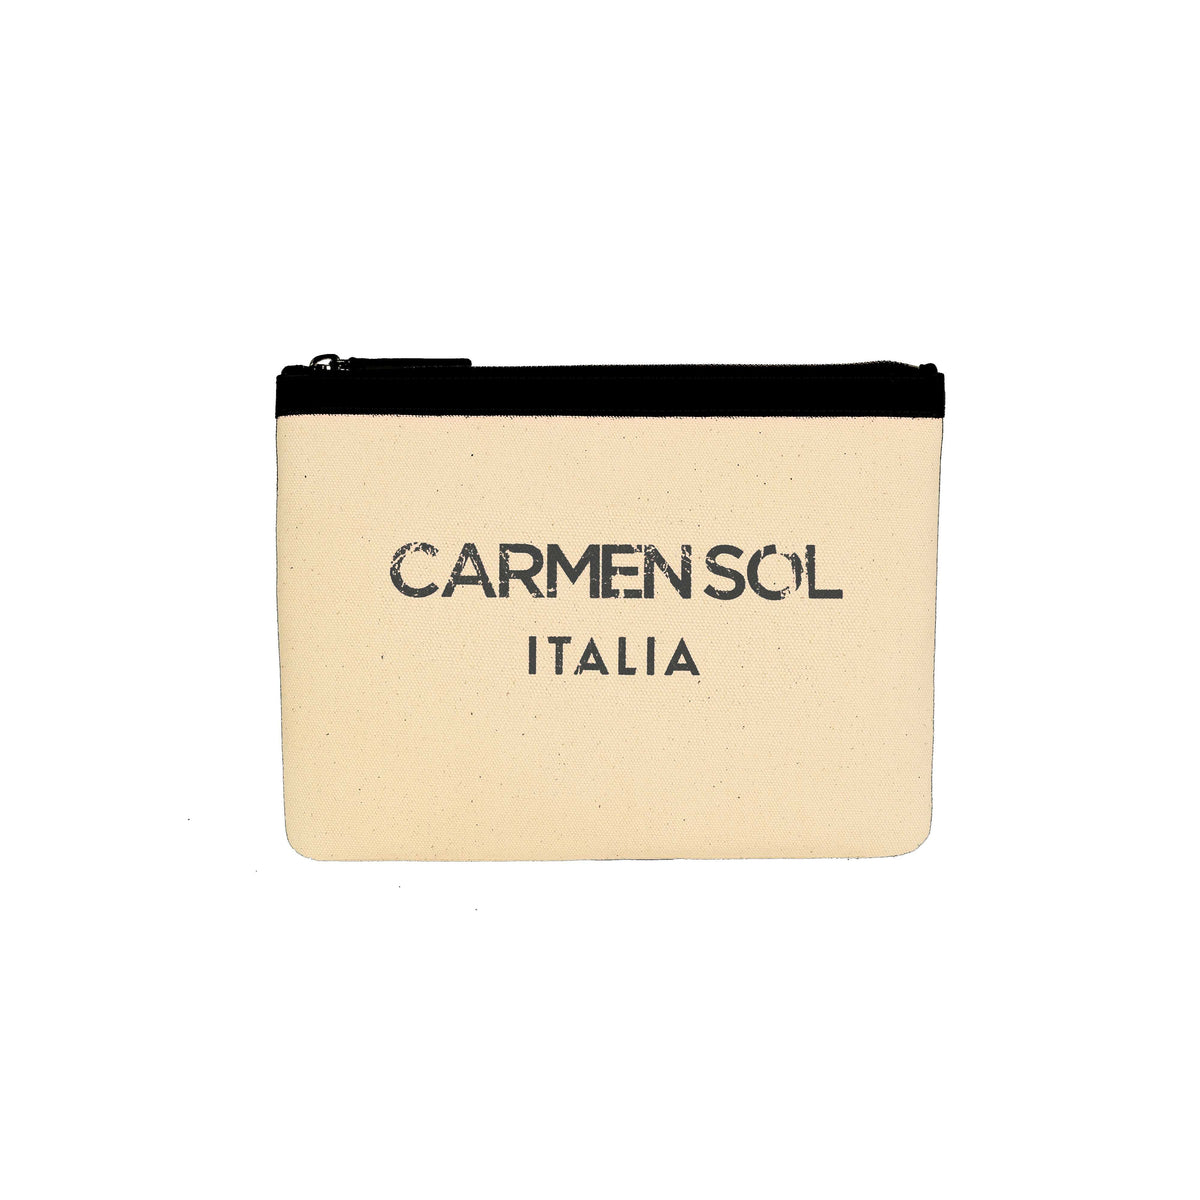 Black canvas purse which is made in Italy from Carmen Sol